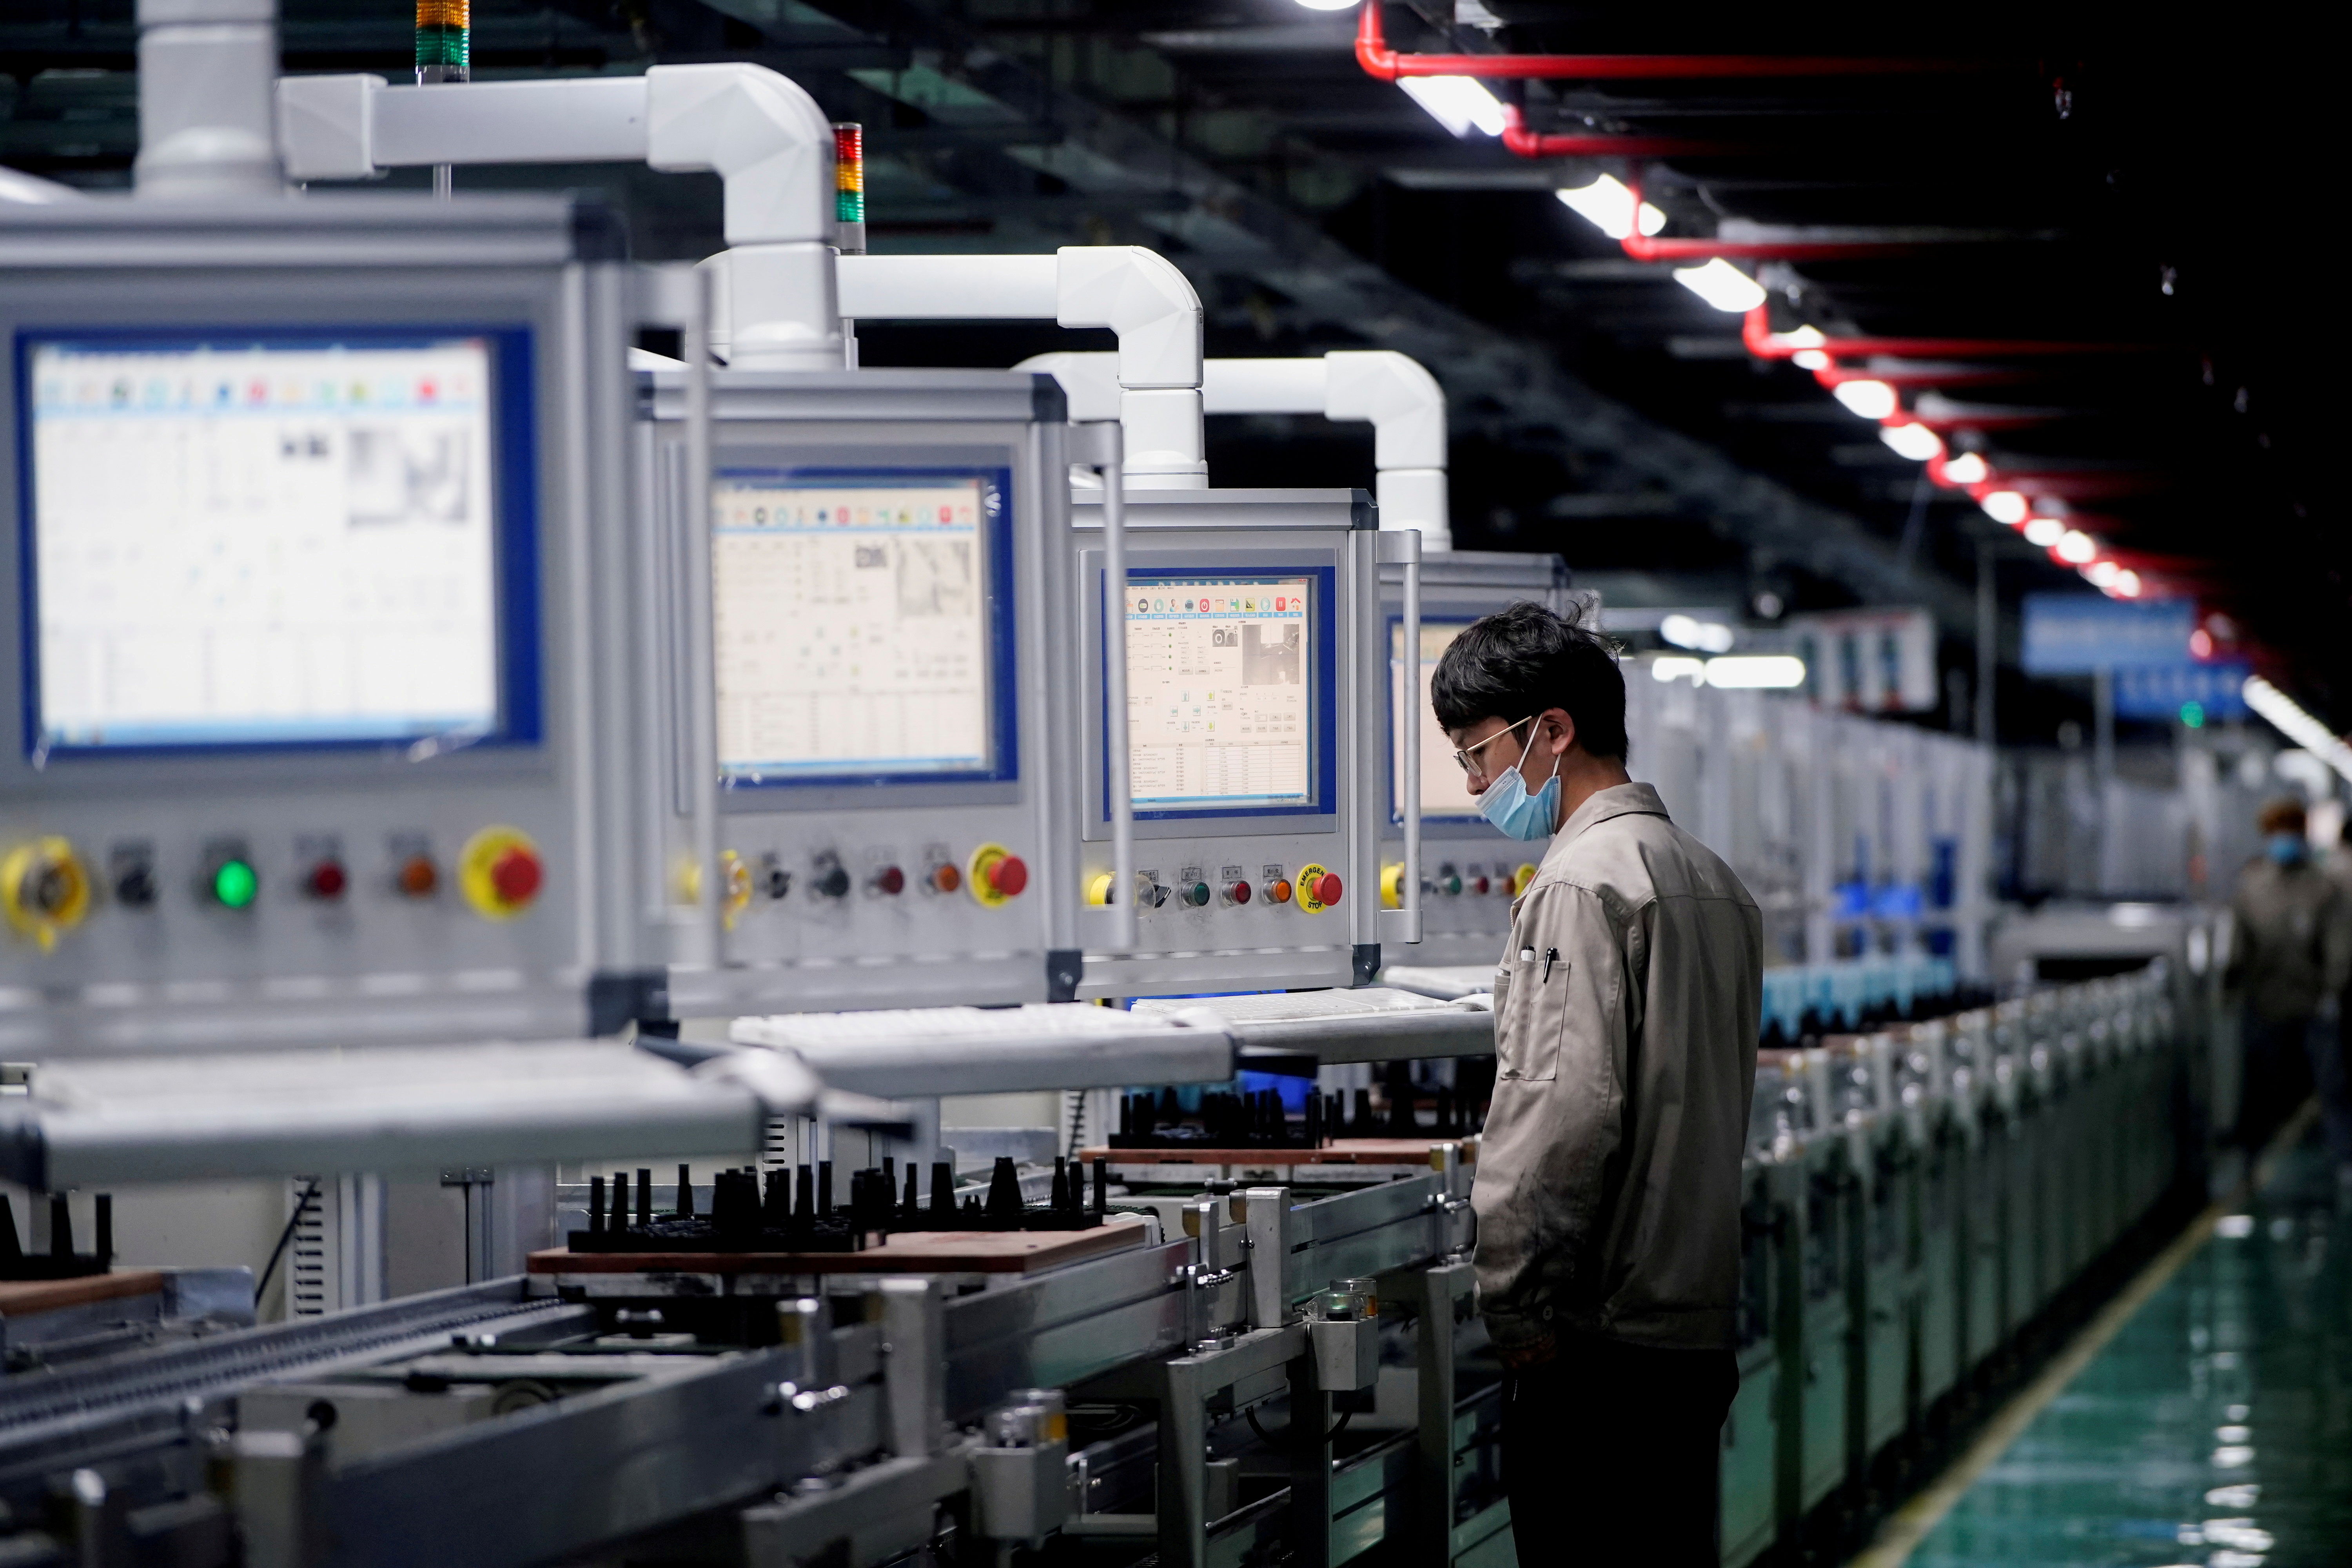 An employee works on the production line of electric vehicle (EV) battery manufacturer Octillion in Hefei